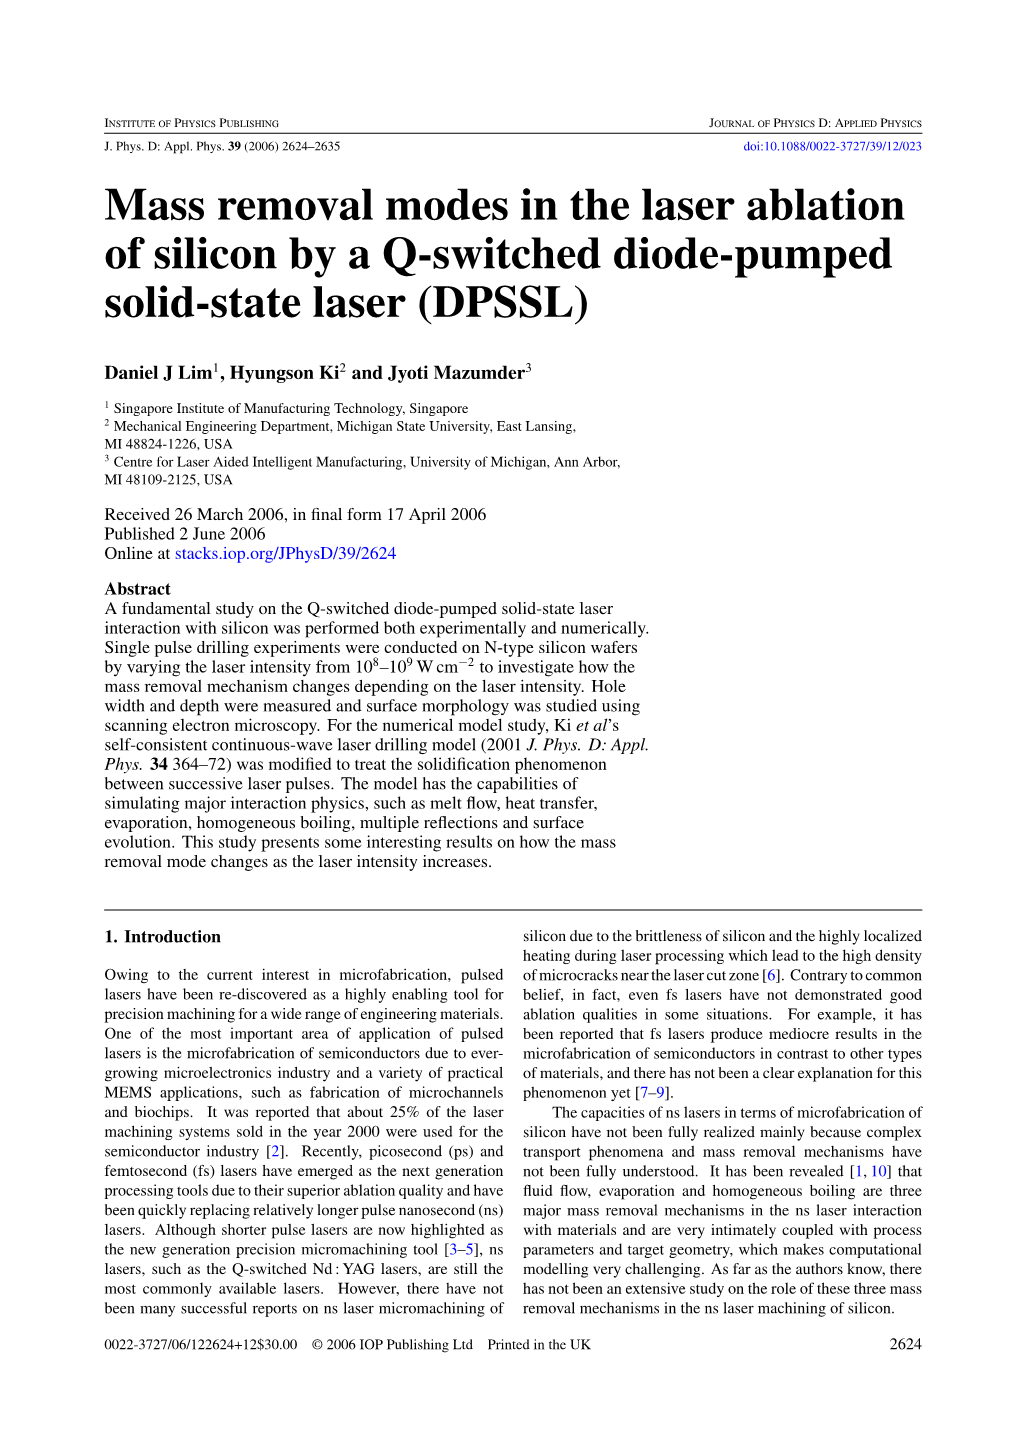 Mass Removal Modes in the Laser Ablation of Silicon by a Q-Switched Diode-Pumped Solid-State Laser (DPSSL)